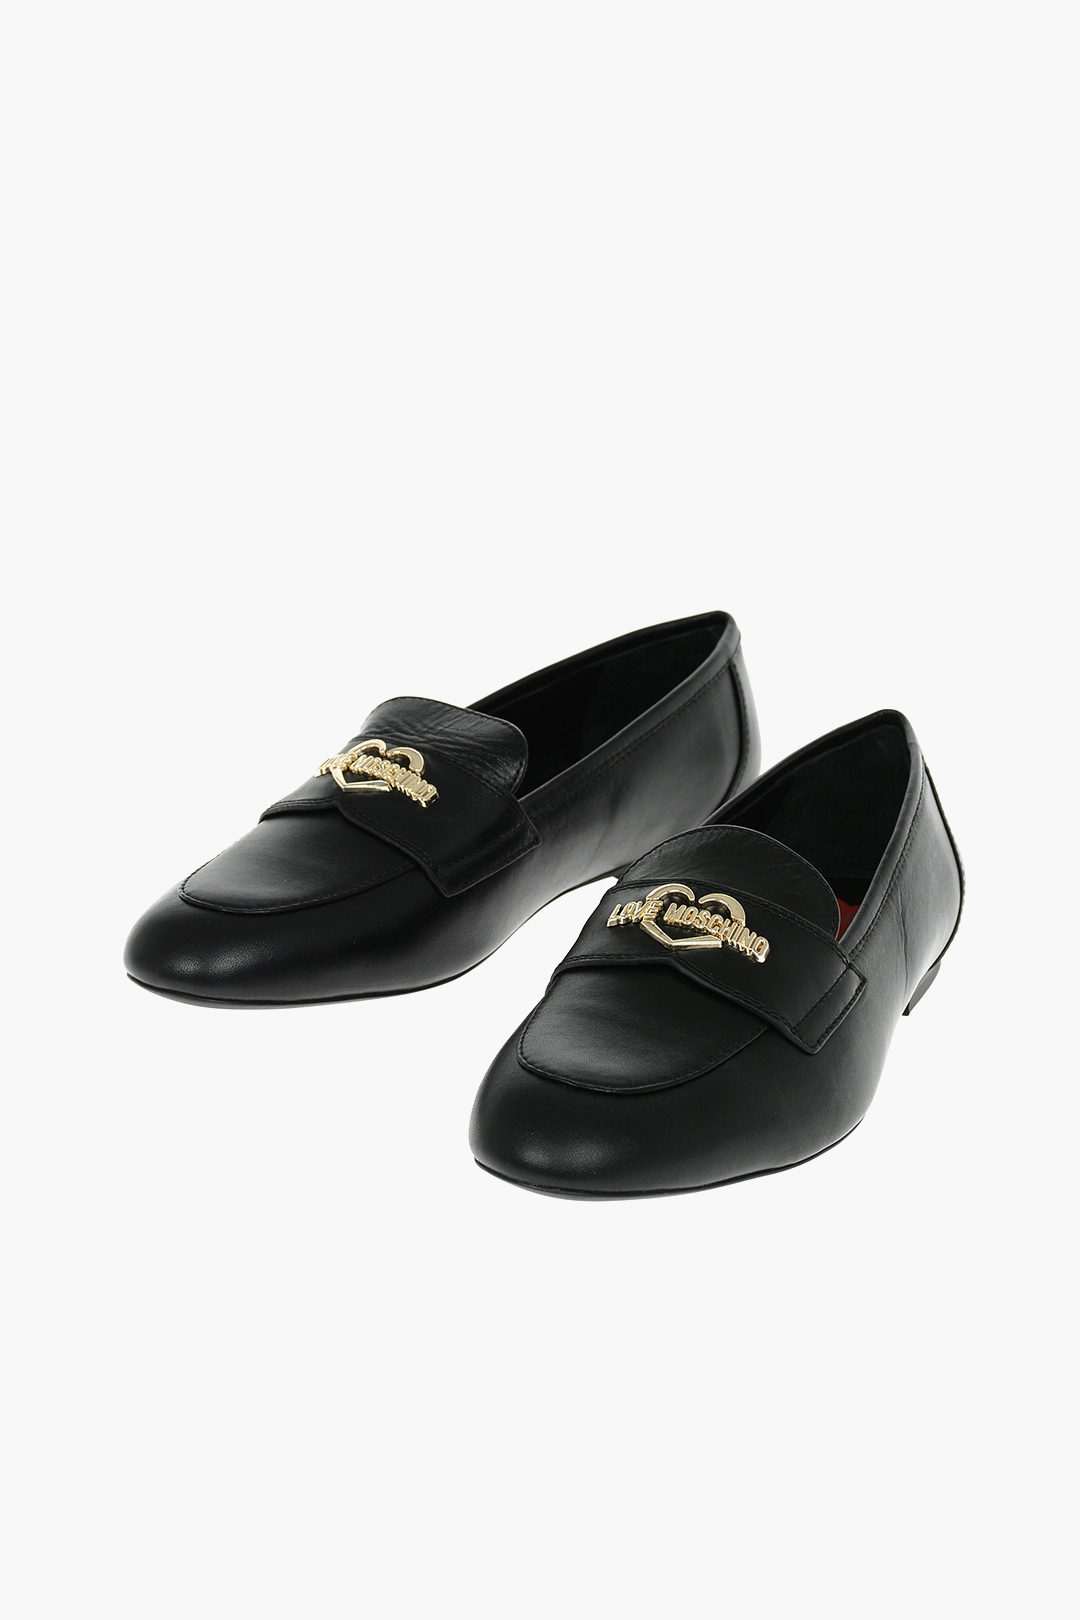 Moschino LOVE Leather Loafers women - Glamood Outlet